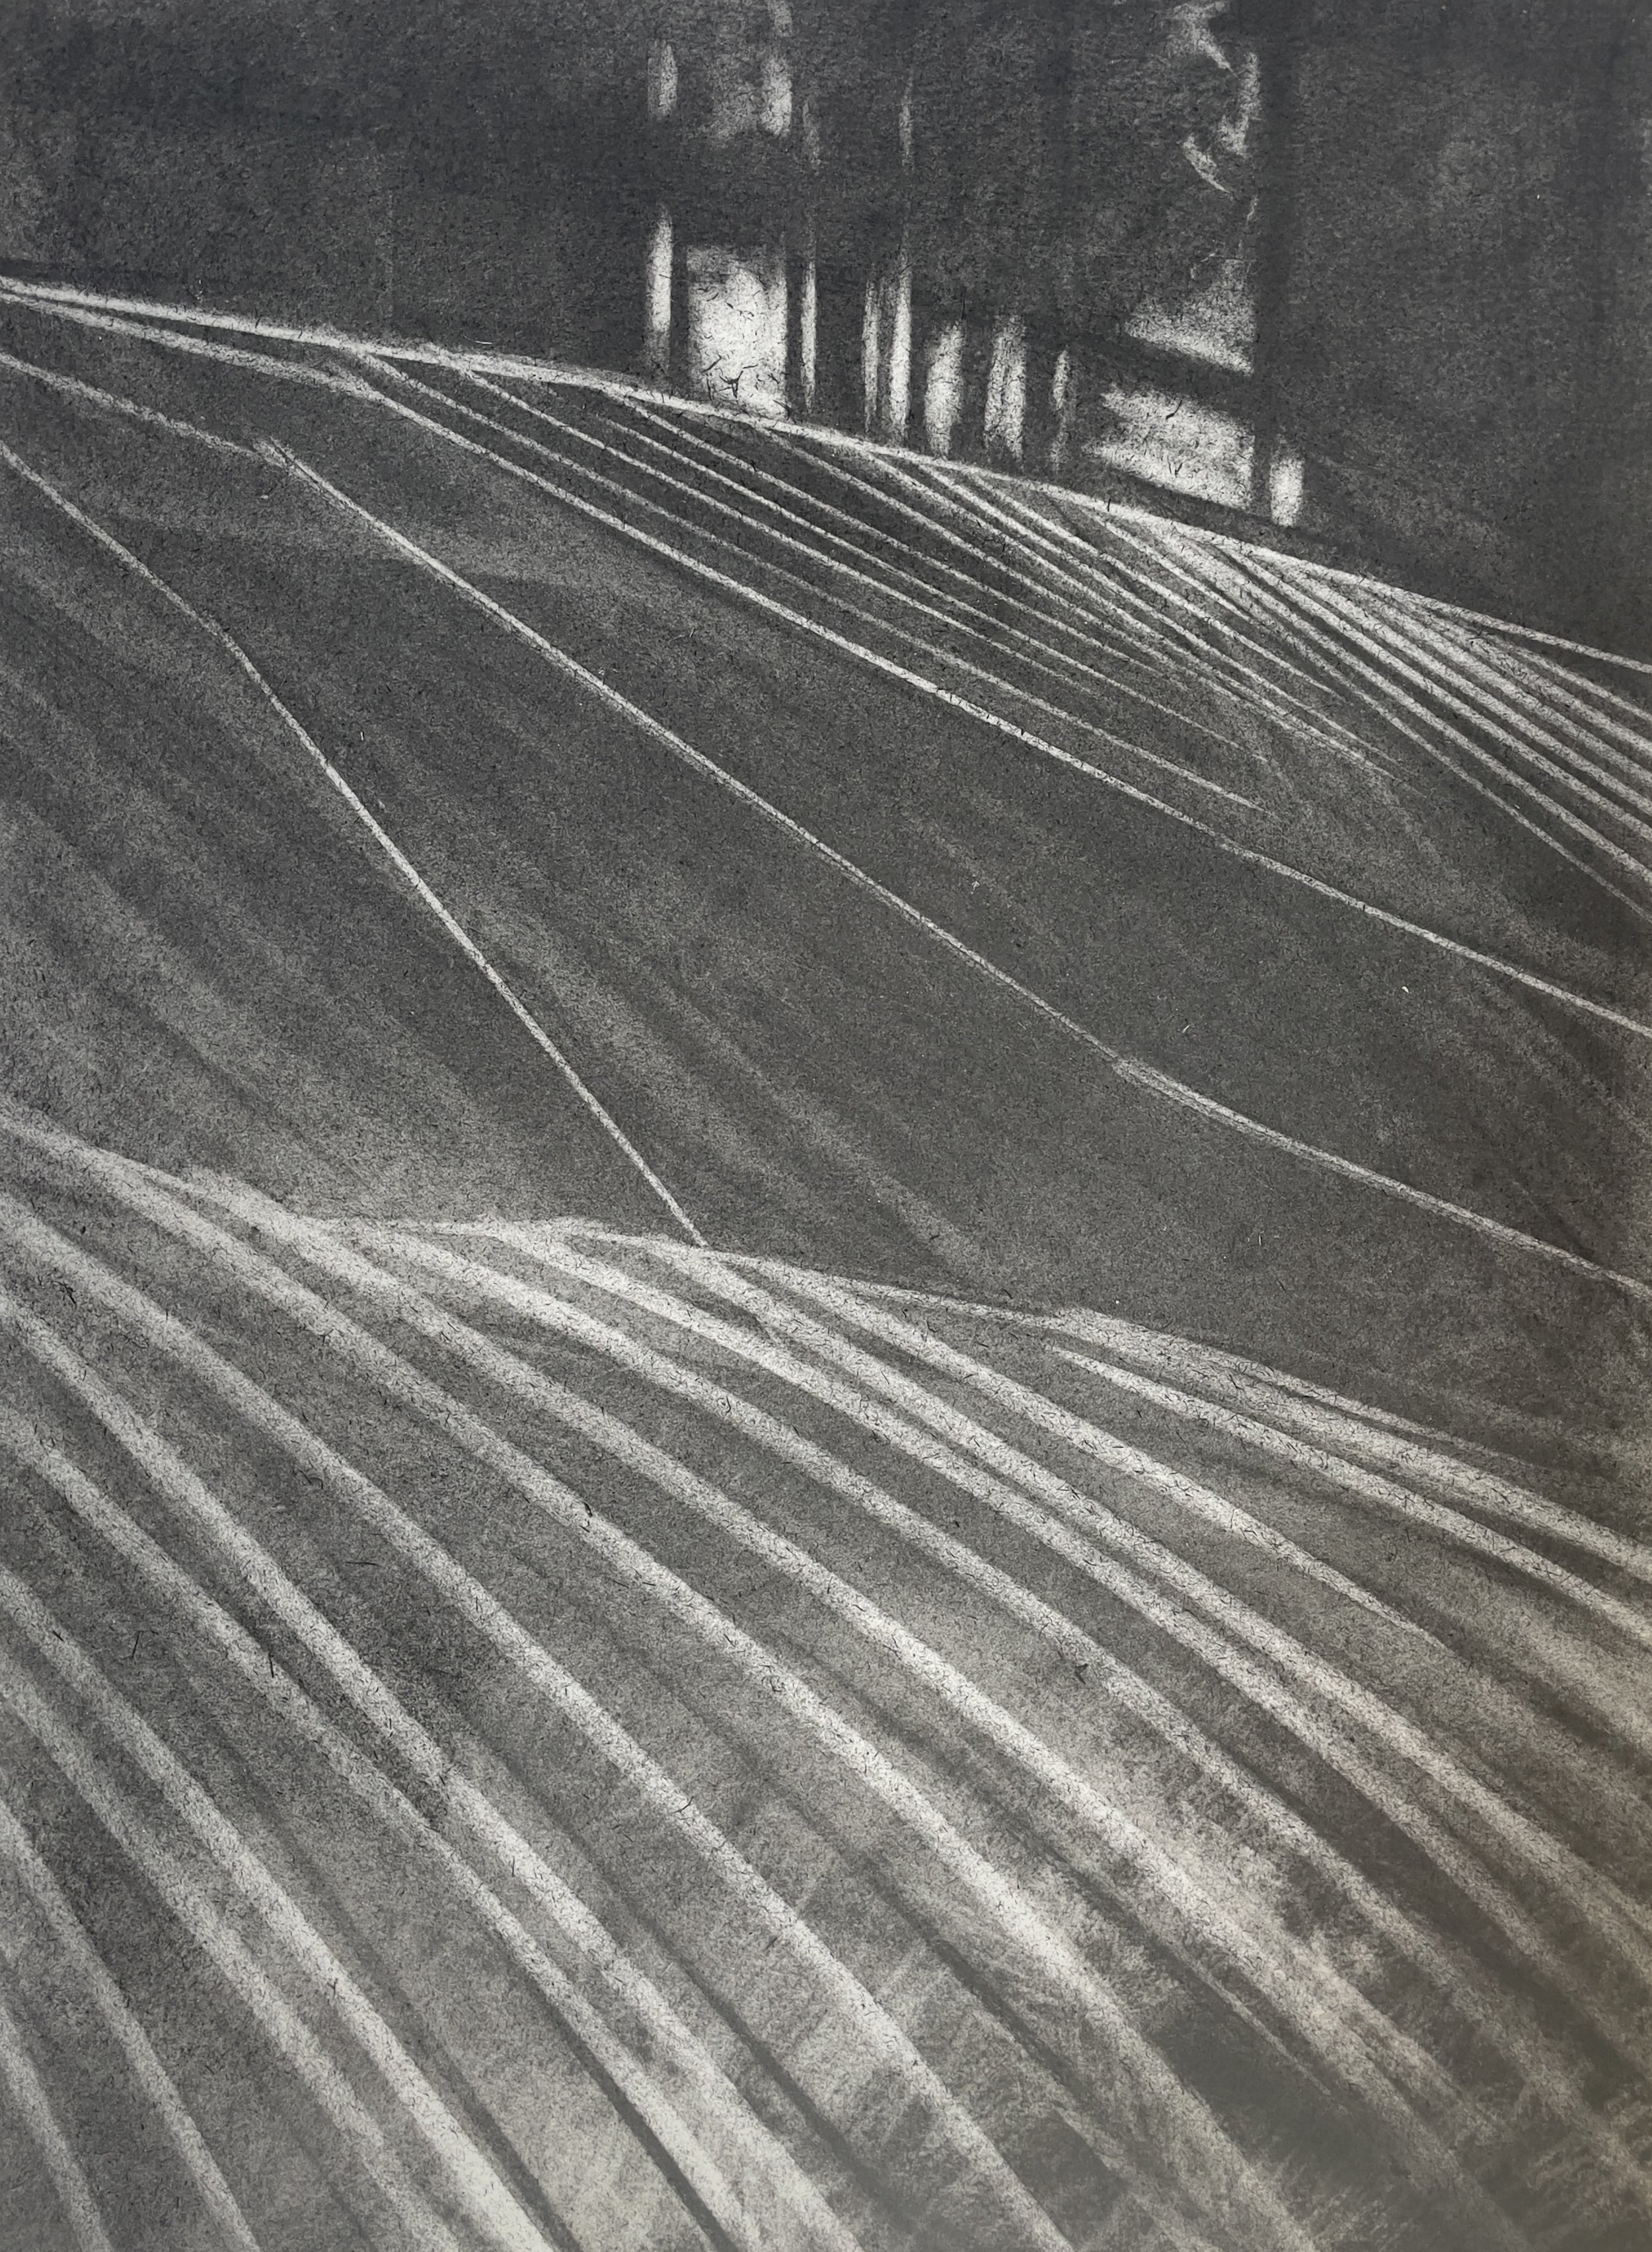   Trace I        by Johanna Connor  charcoal on watercolour paper   img: 48 x 36 cm     frm: 61 x 49 cm 